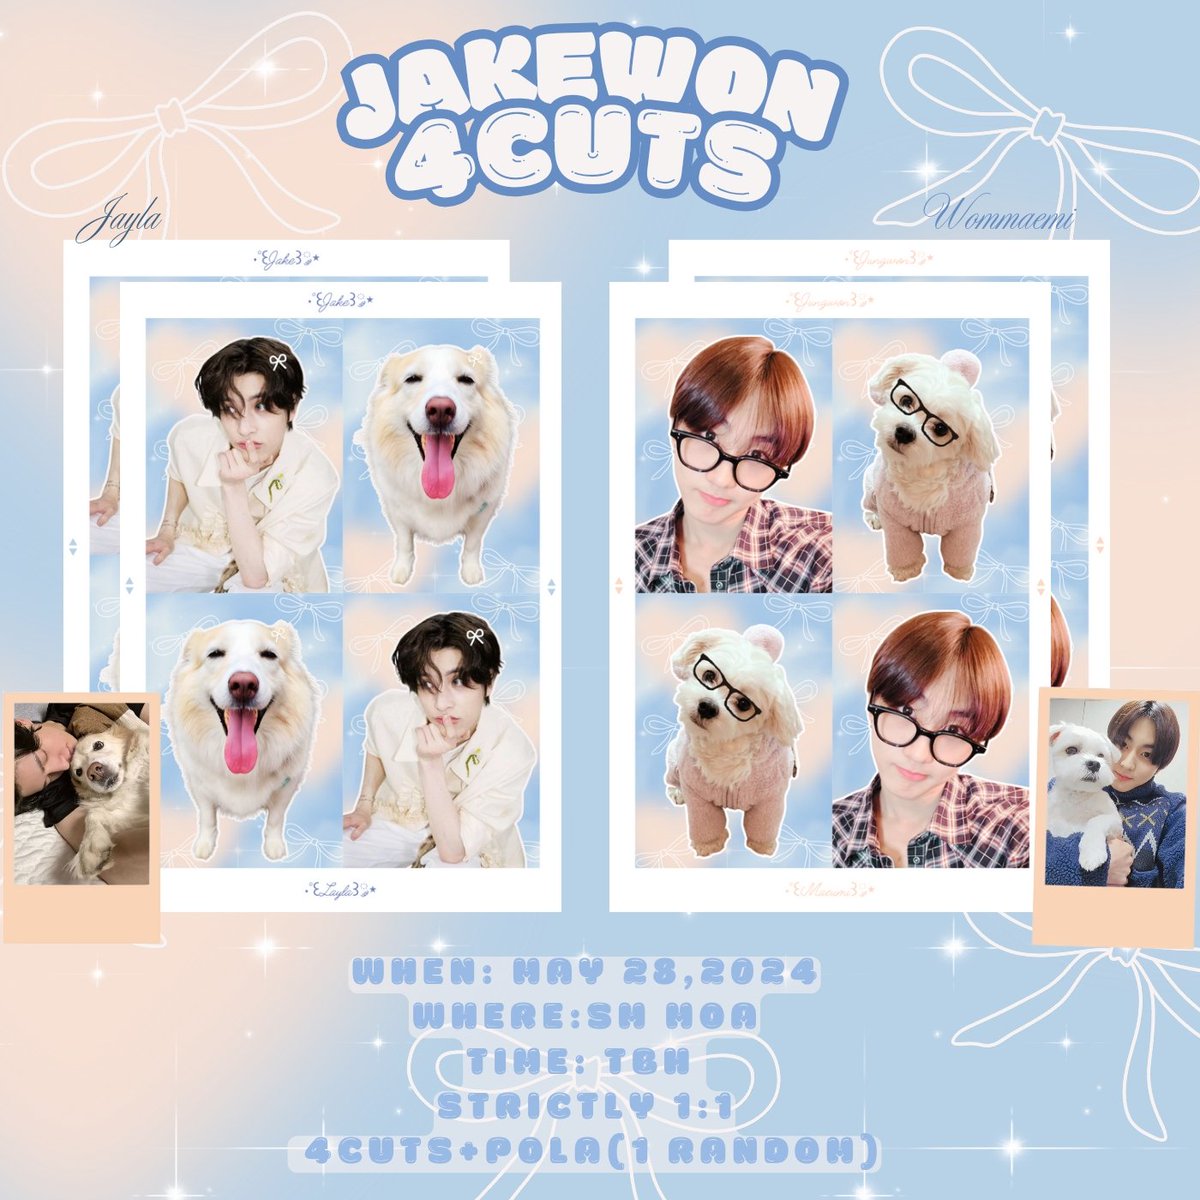 Enhypen x Bench Funmeet banner ( freebie ) 
 
૮ ＾ﻌ＾ა
🐾Jayla & Wonmaeumi 4Cuts freebie🐾
──
  𔓘 Like & RT 
 𔓘stricly 1:1 ( limited )
 𔓘Open for  trade on the d-day 
 𔓘 will be on koomi for the cse just approach me    

See you po~

 #ASweetExperienceWithBENCH